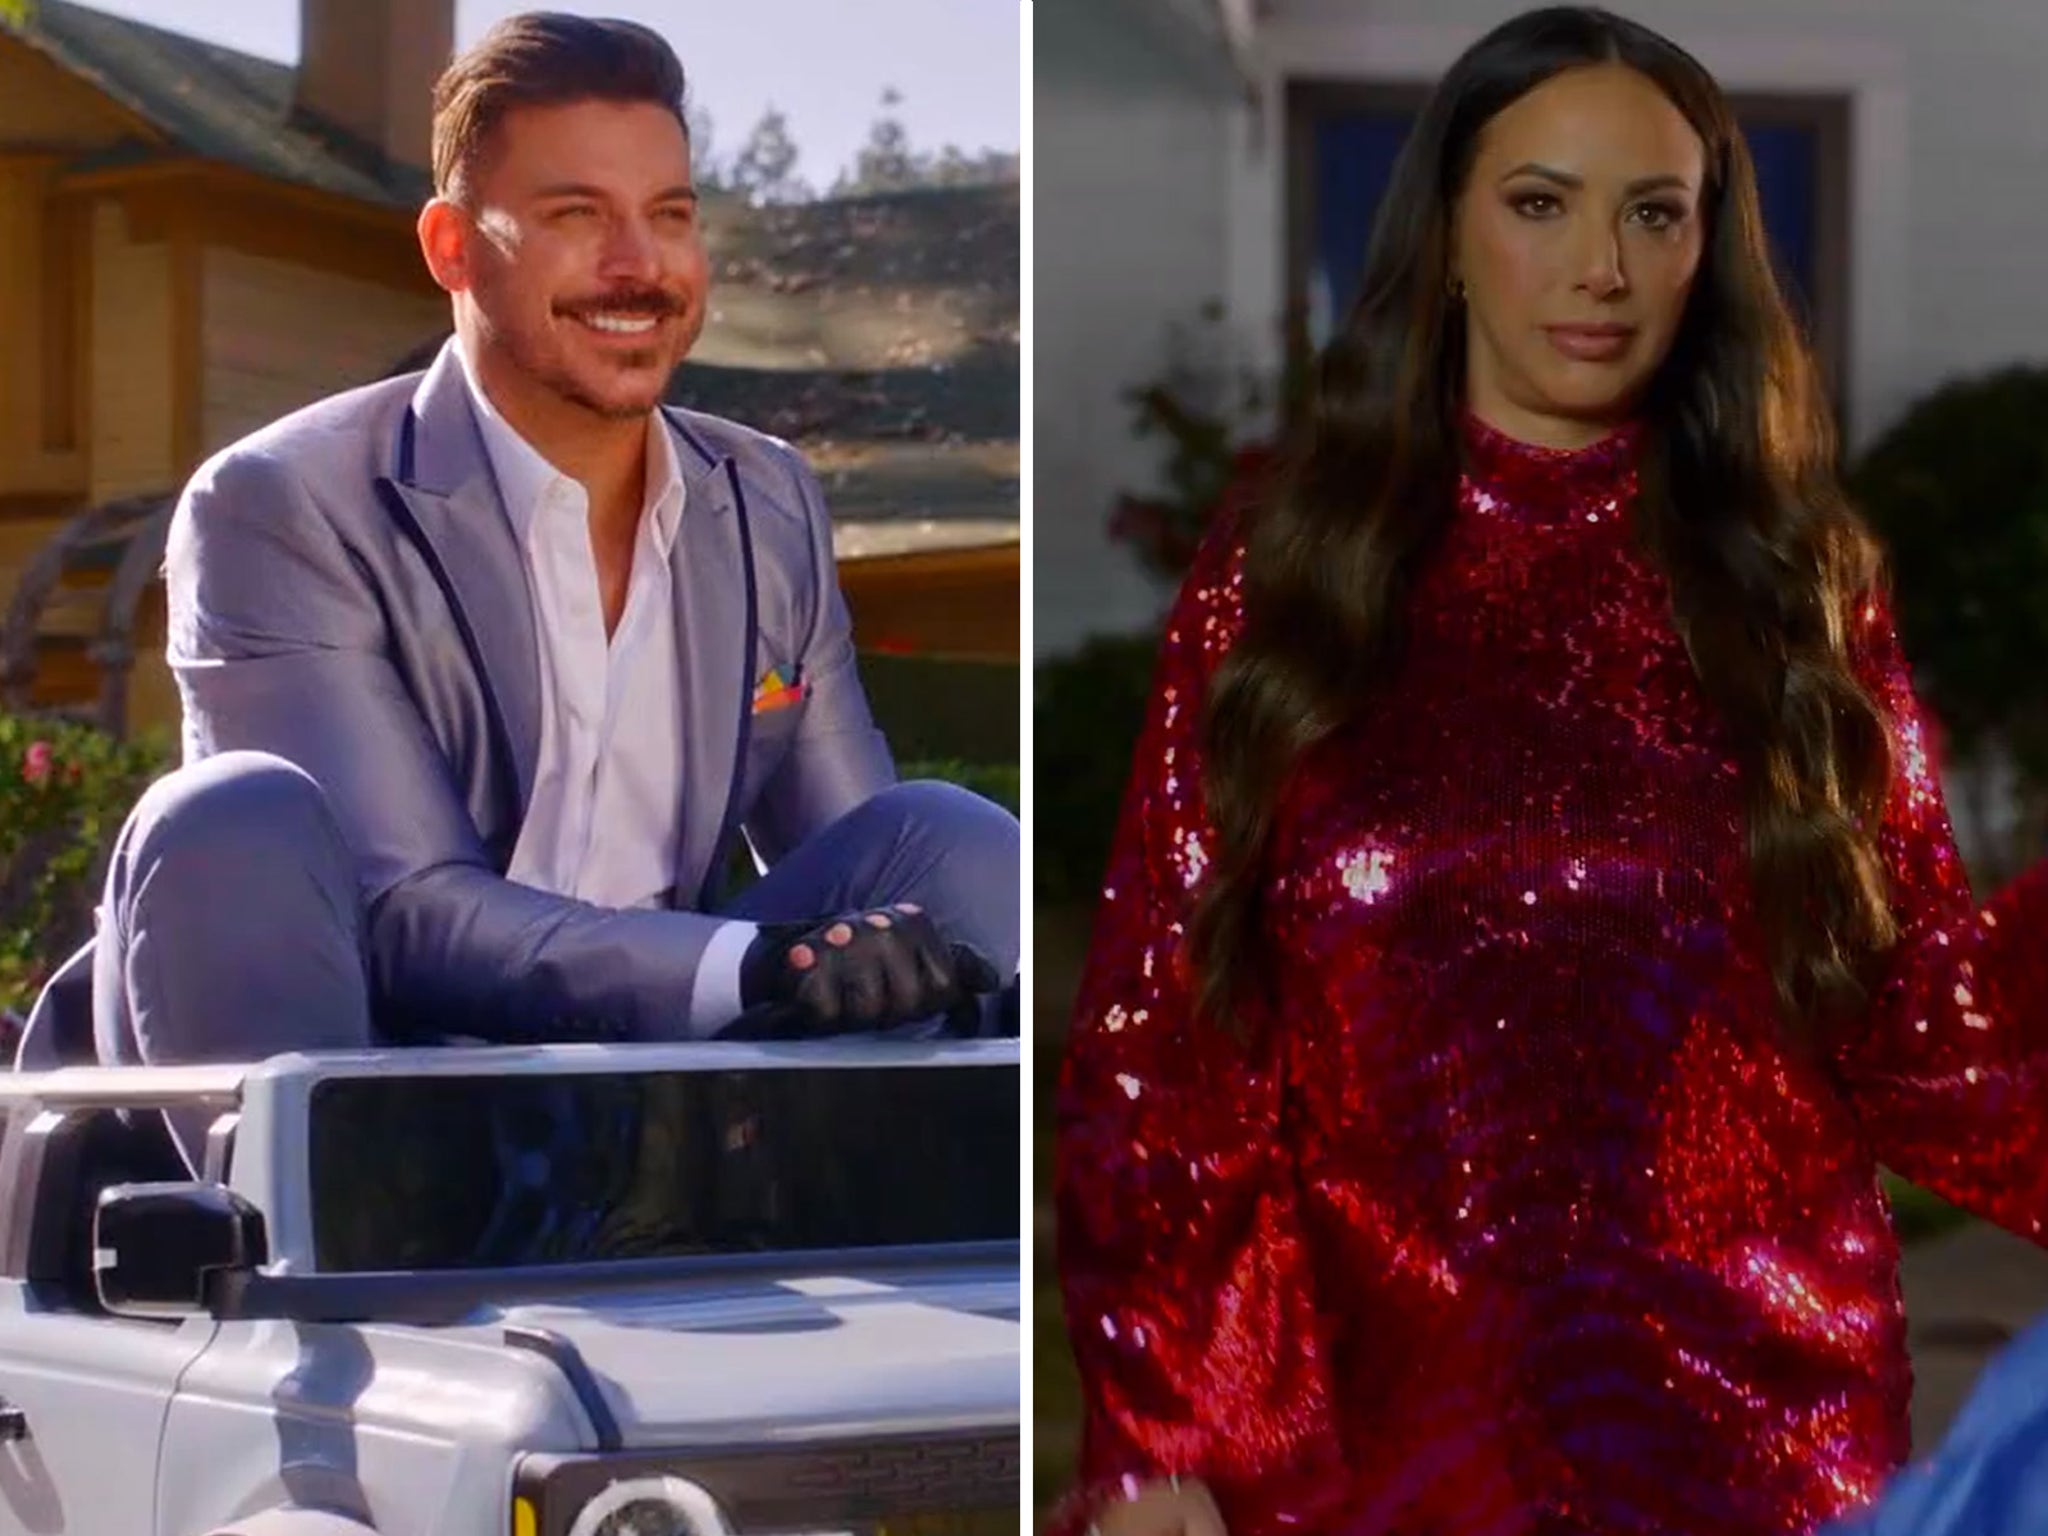 Vanderpump Rules' Spinoff 'The Valley': Premiere Date, Cast